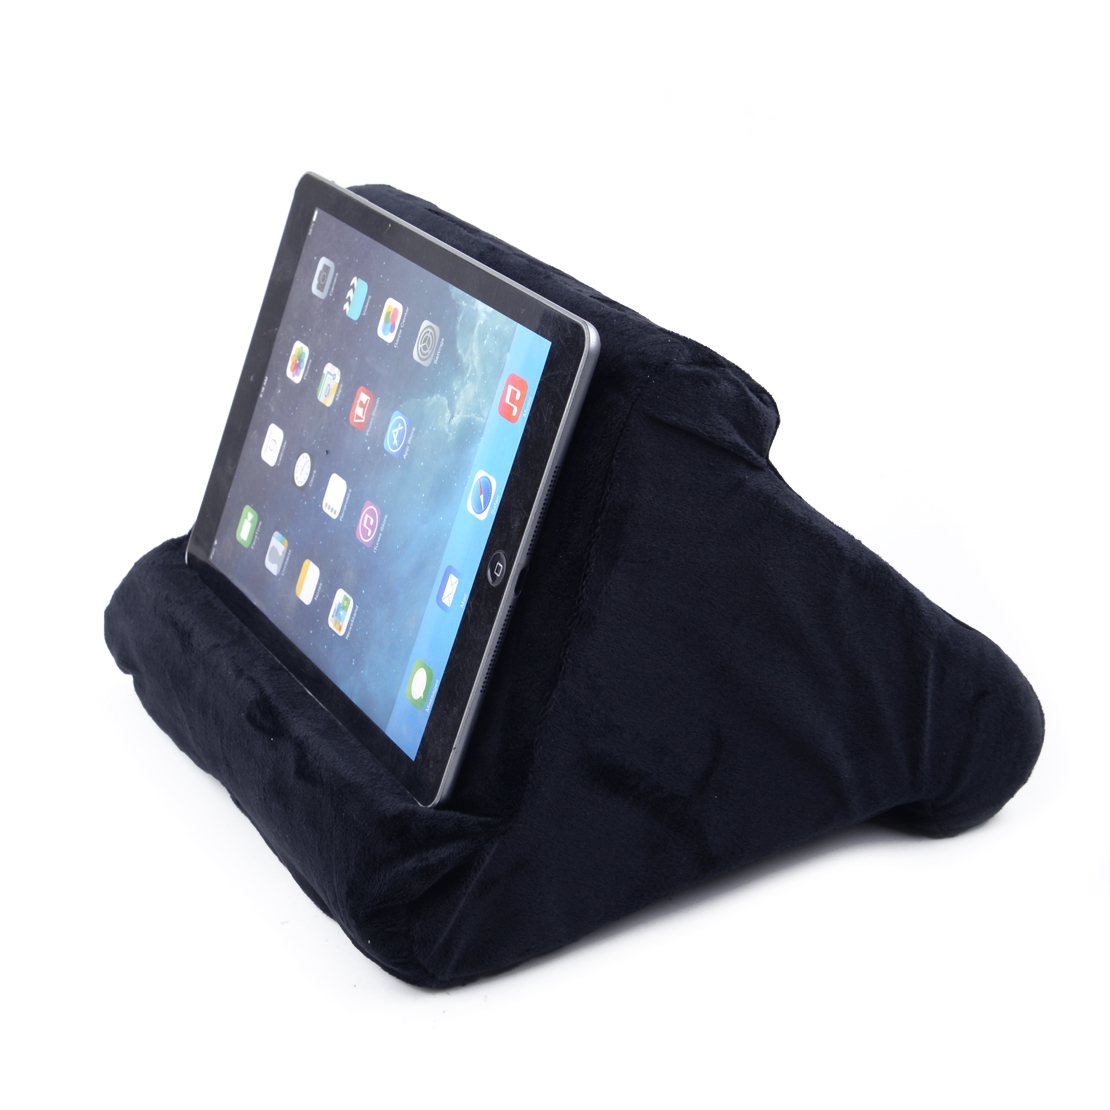 Pillow Lap Stand Holder Multi-Angle Reading Support Cushion Universal Smartphone Tablet E-Readers Books Lap Stand